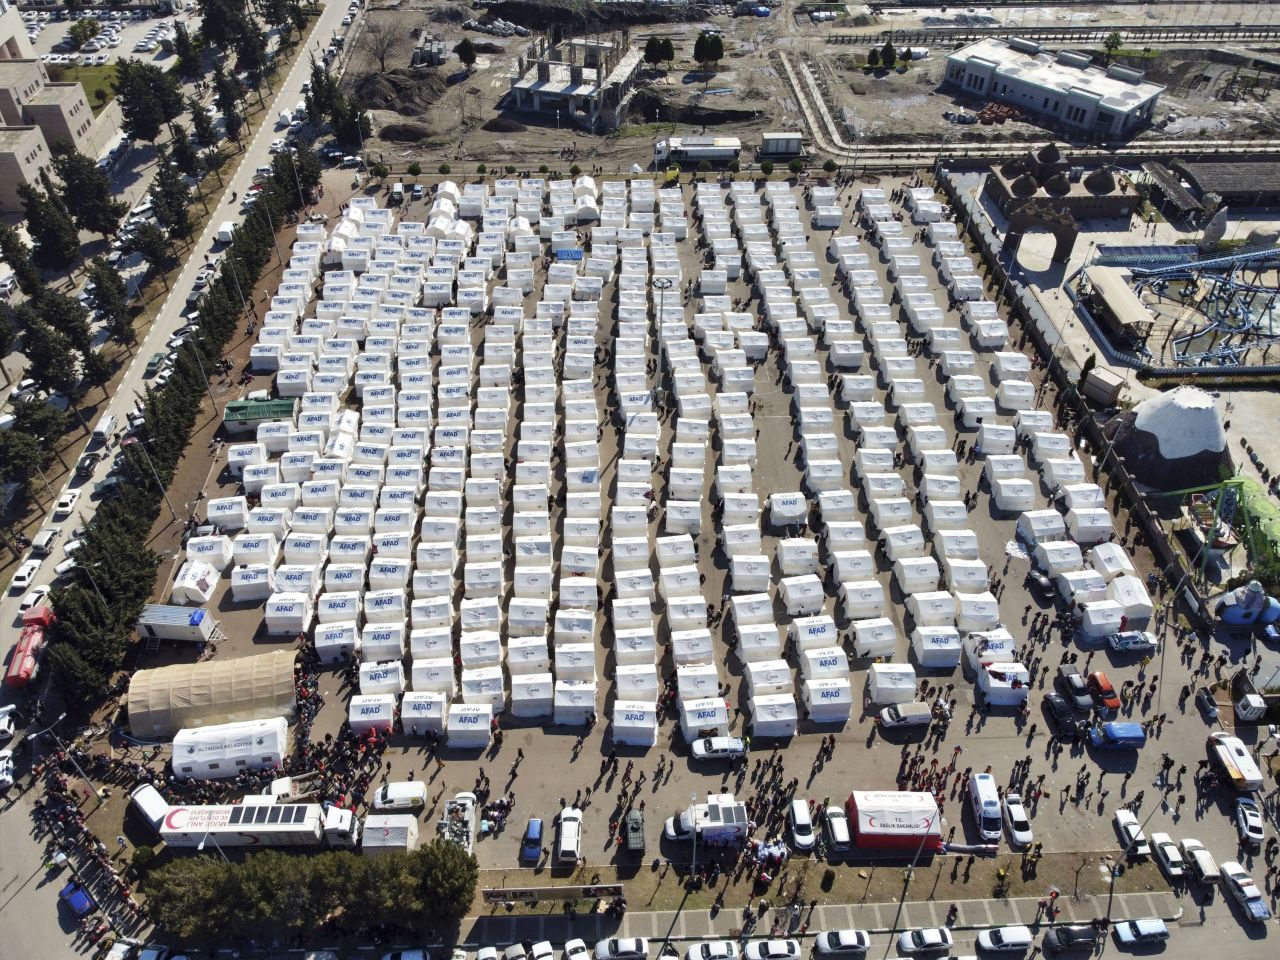 An aerial view shows a tent city to house earthquake victims set up by Turkey's Disaster and Emergency Management Authority in Osmaniye on Wednesday.